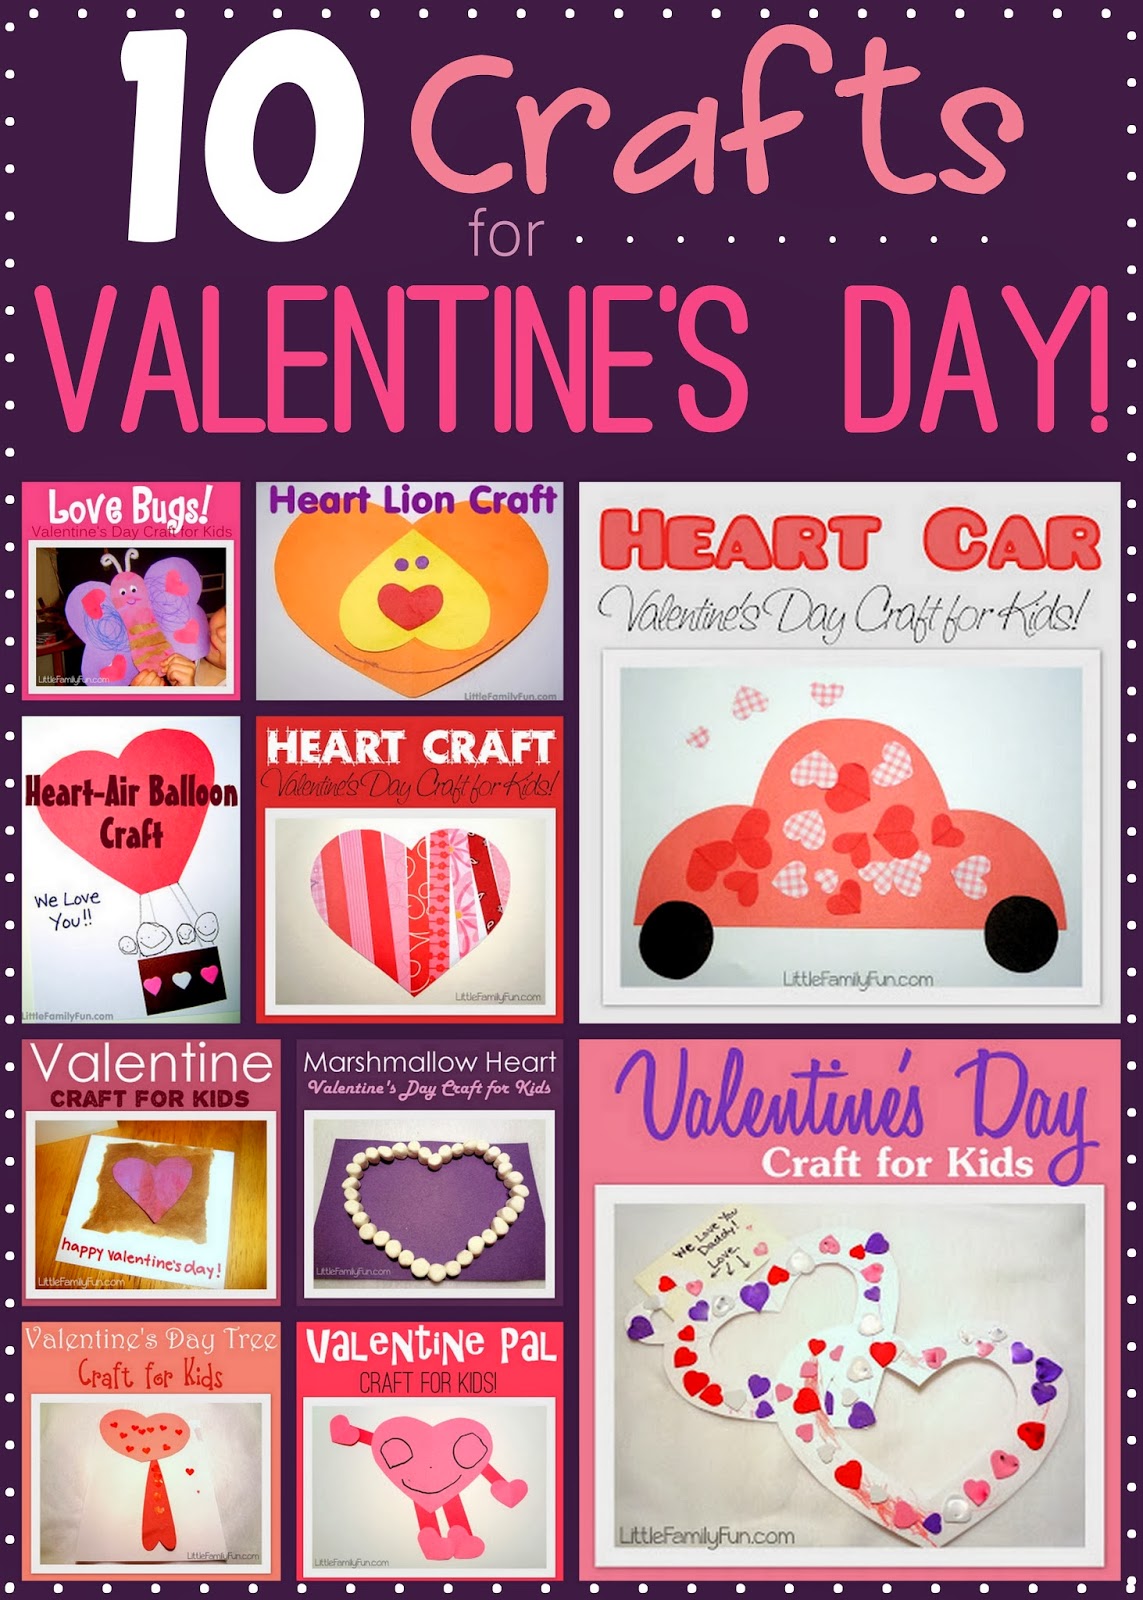 Little Family Fun: Valentine's Day Crafts for Kids!